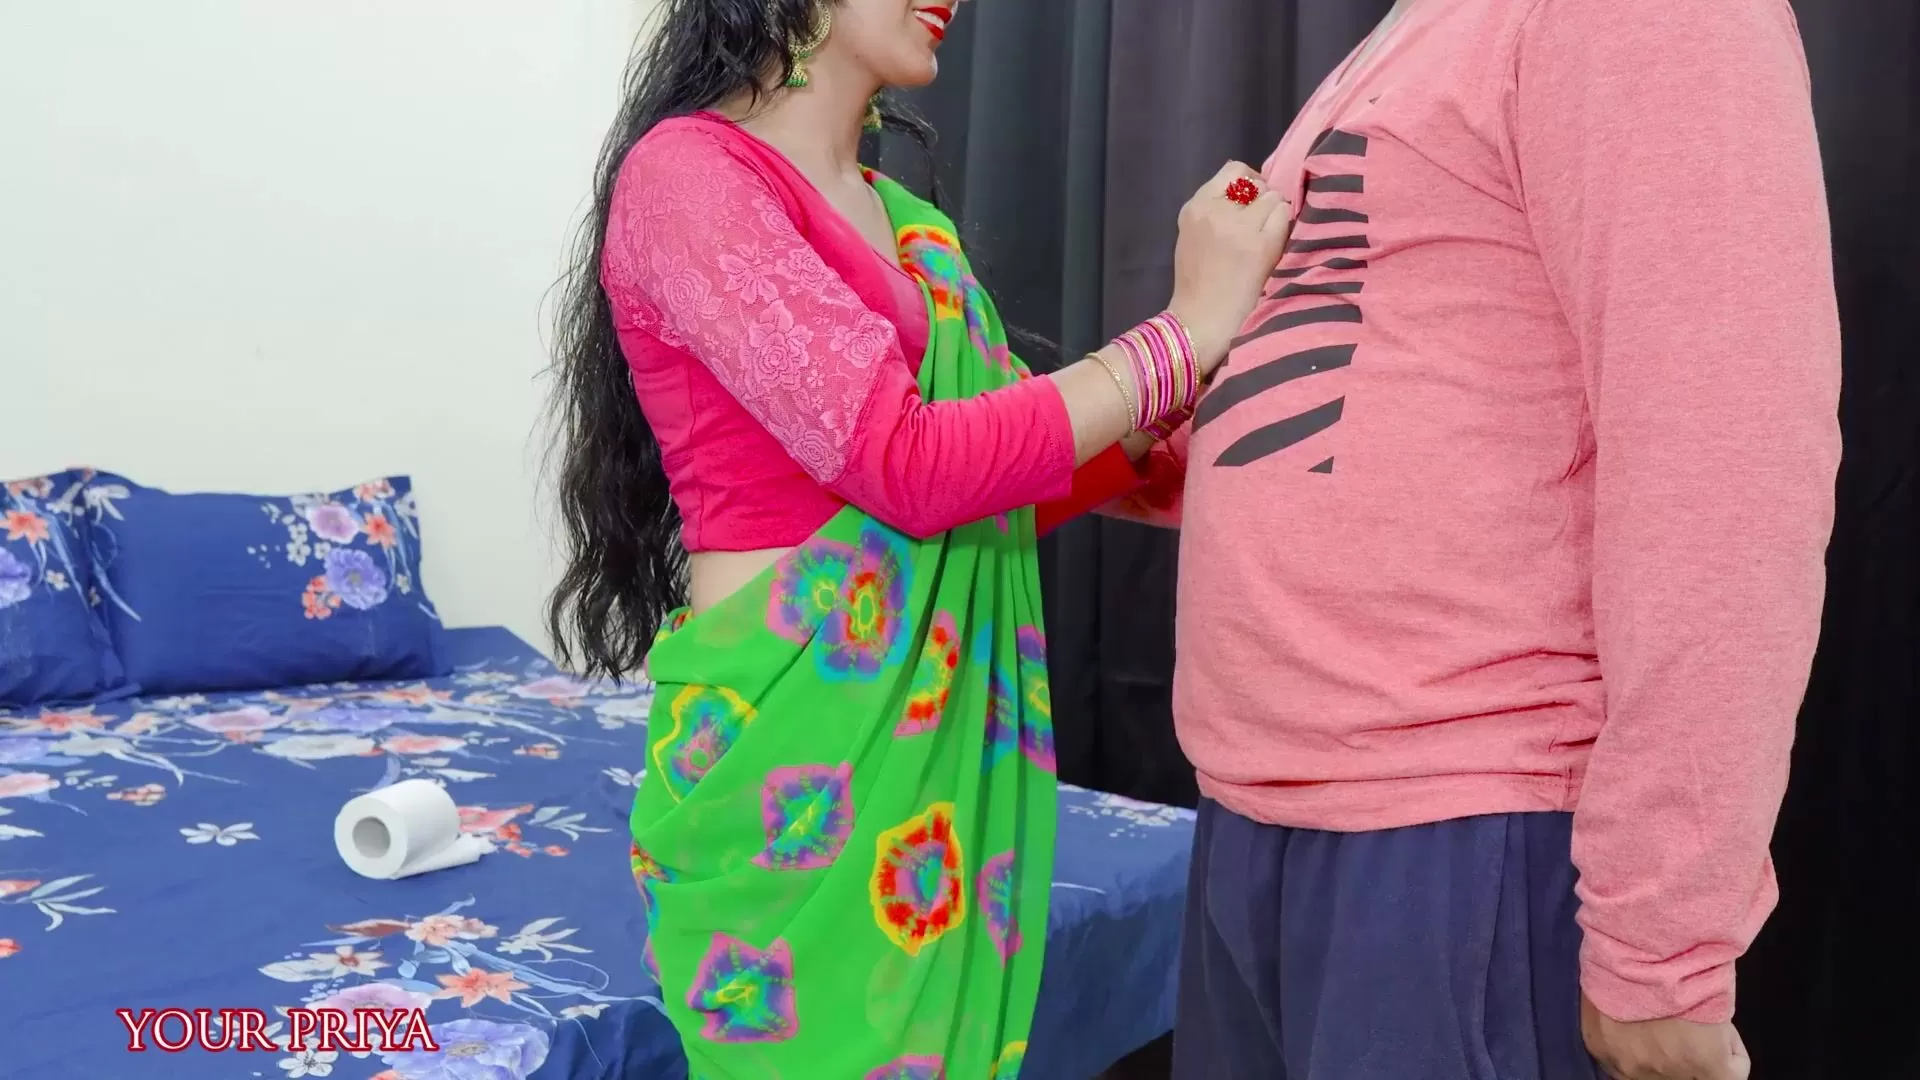 Inexperienced aunt wiped out her lust with her nephew's big cock. In clear  Hindi voice. YOUR PRIYA watch online